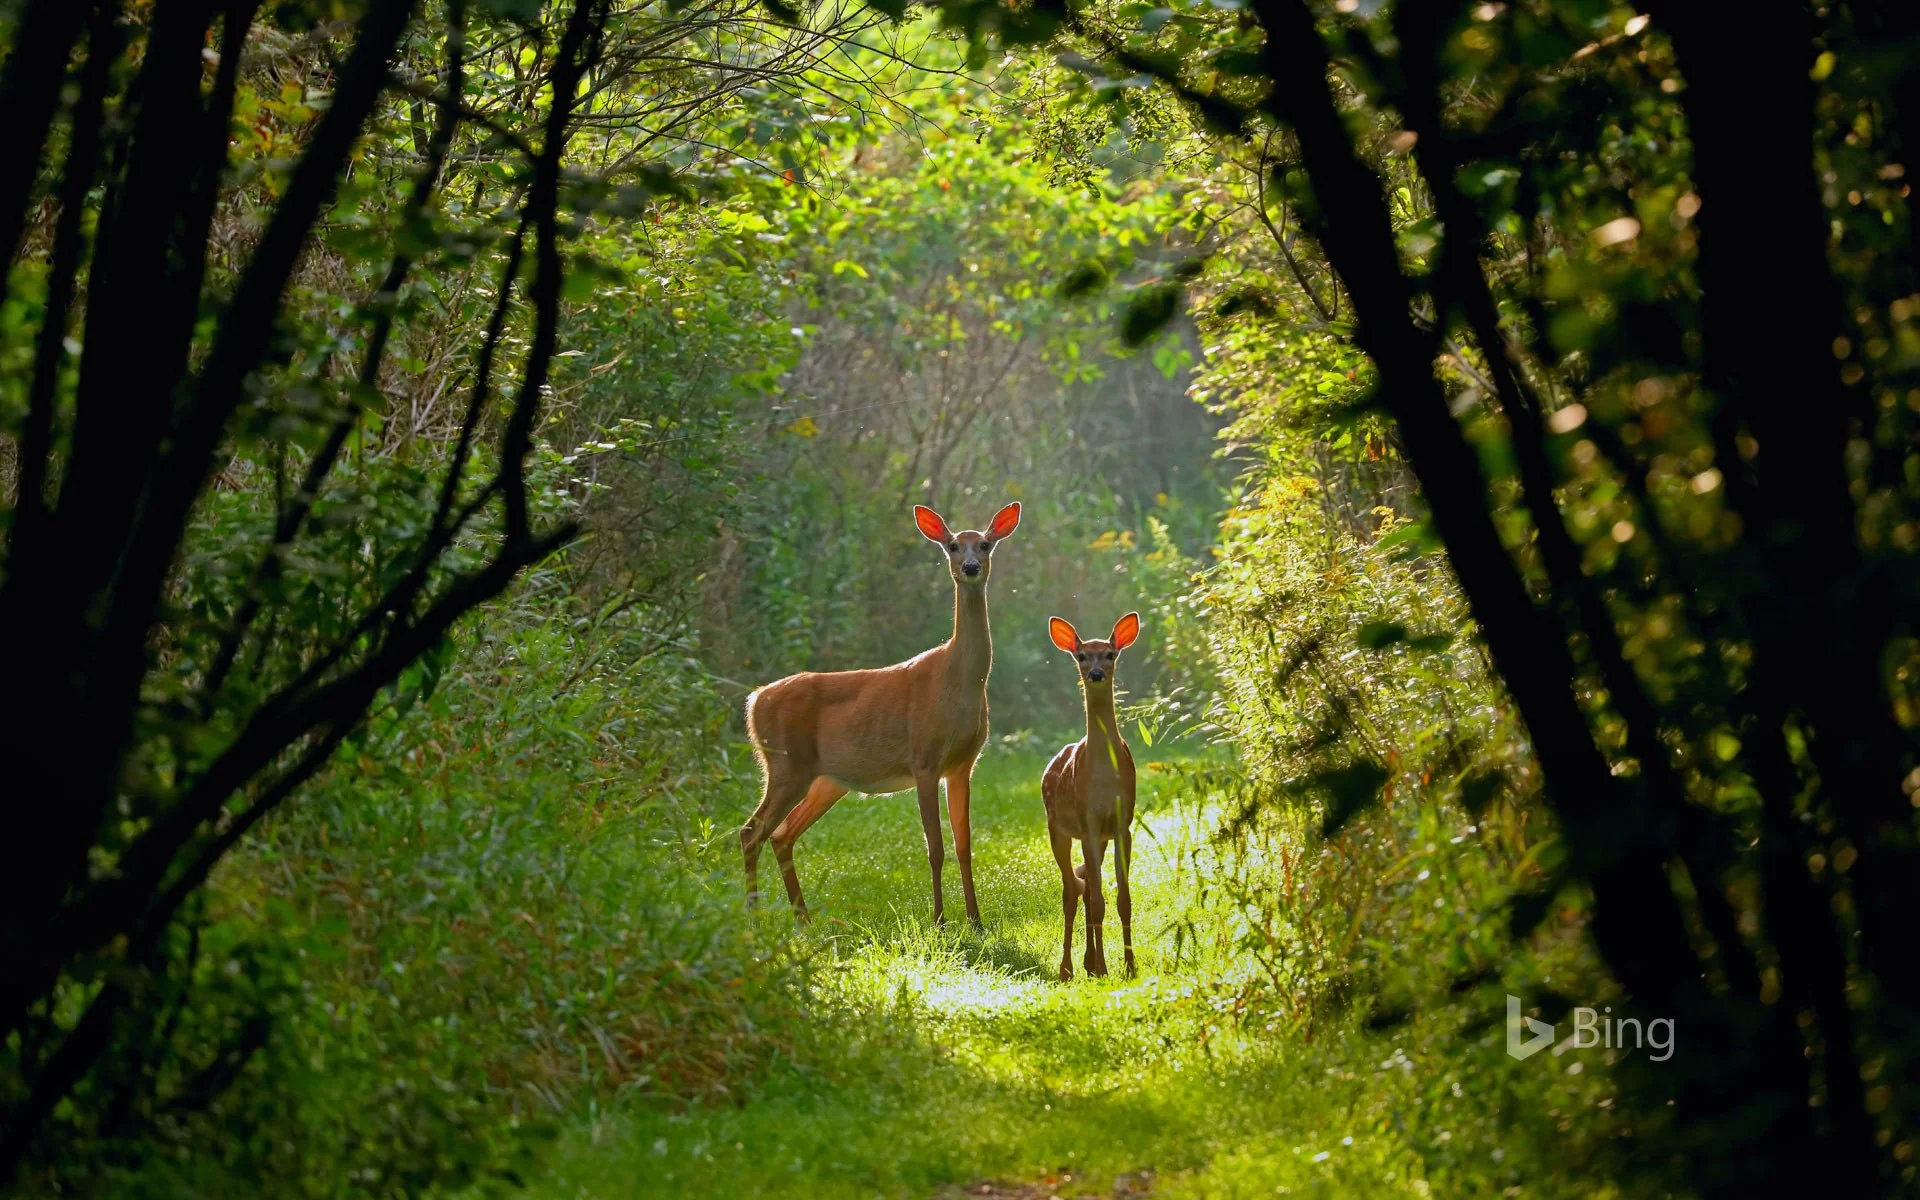 White tailed deer : Into the woods